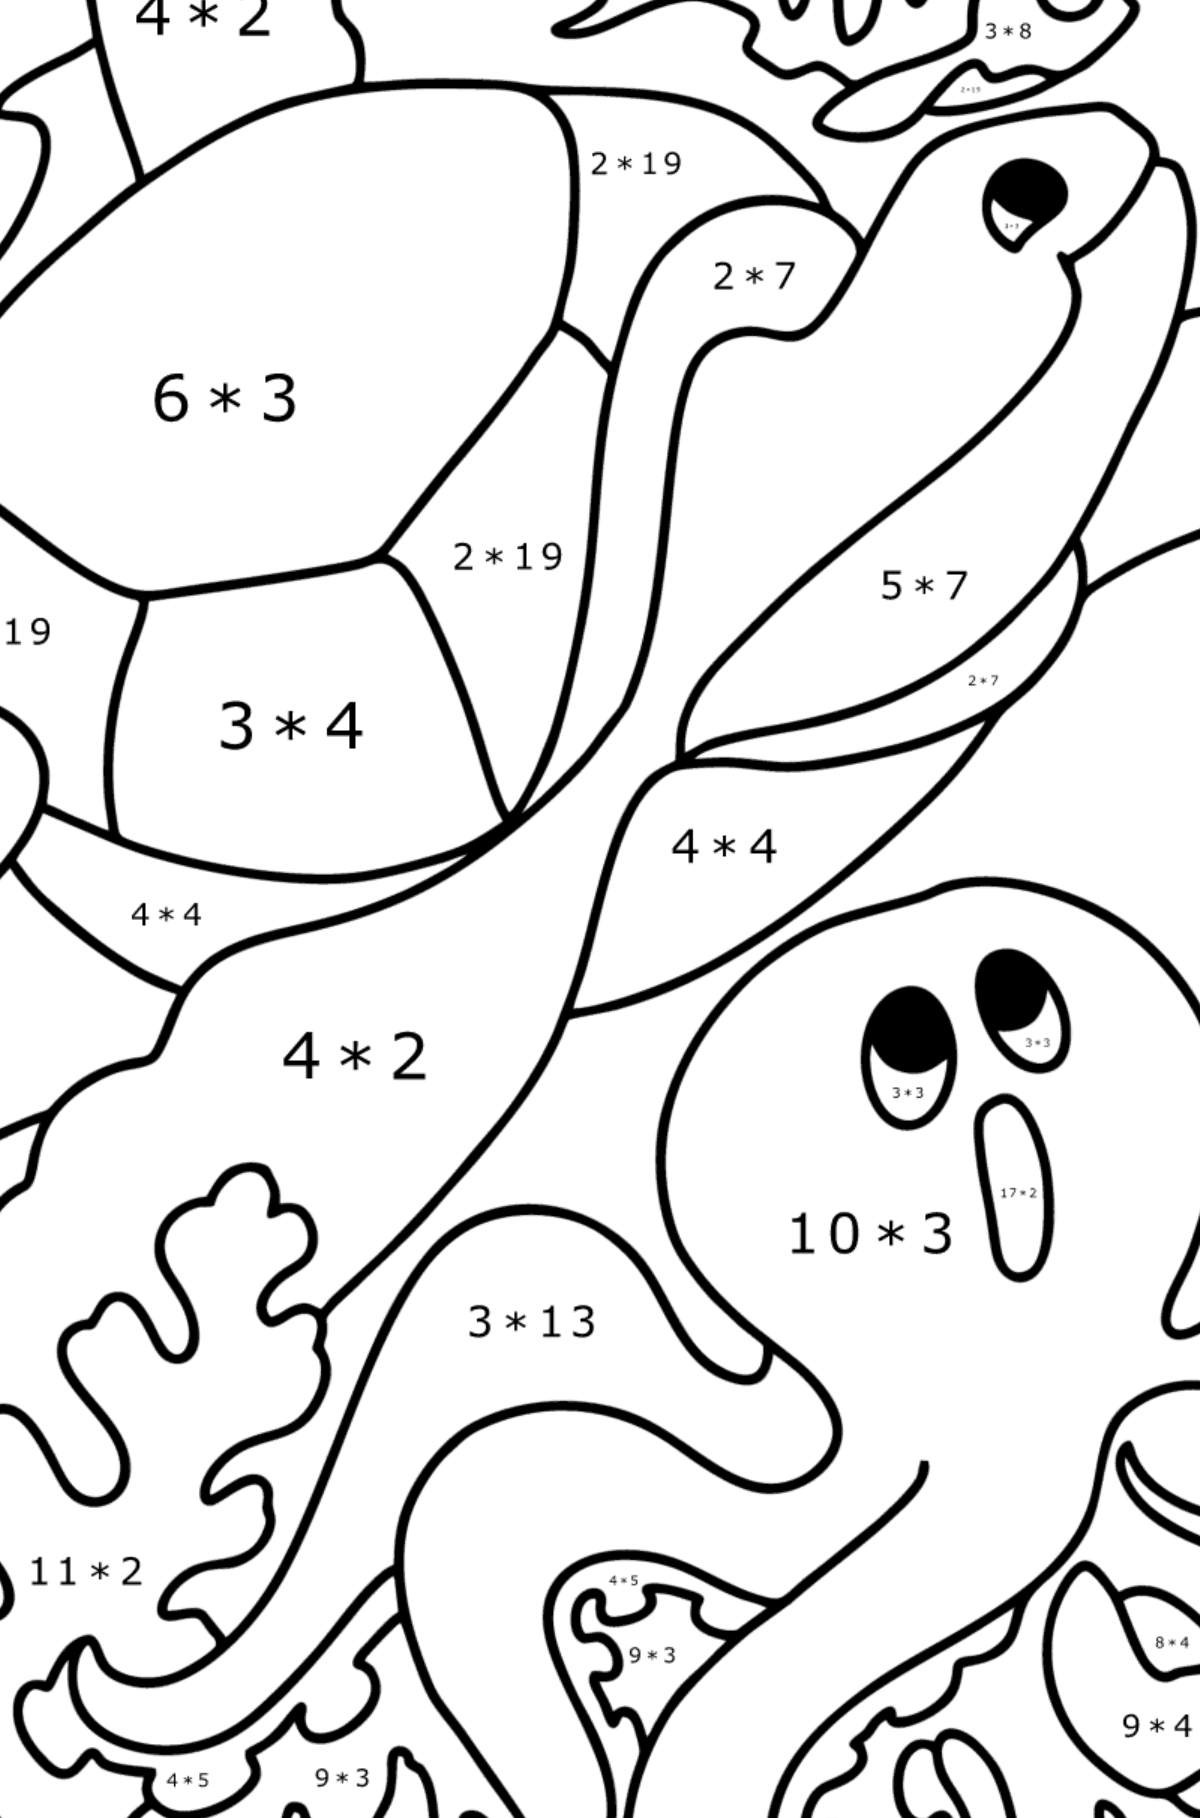 Fish, Turtle, Crab and Octopus coloring page - Math Coloring - Multiplication for Kids